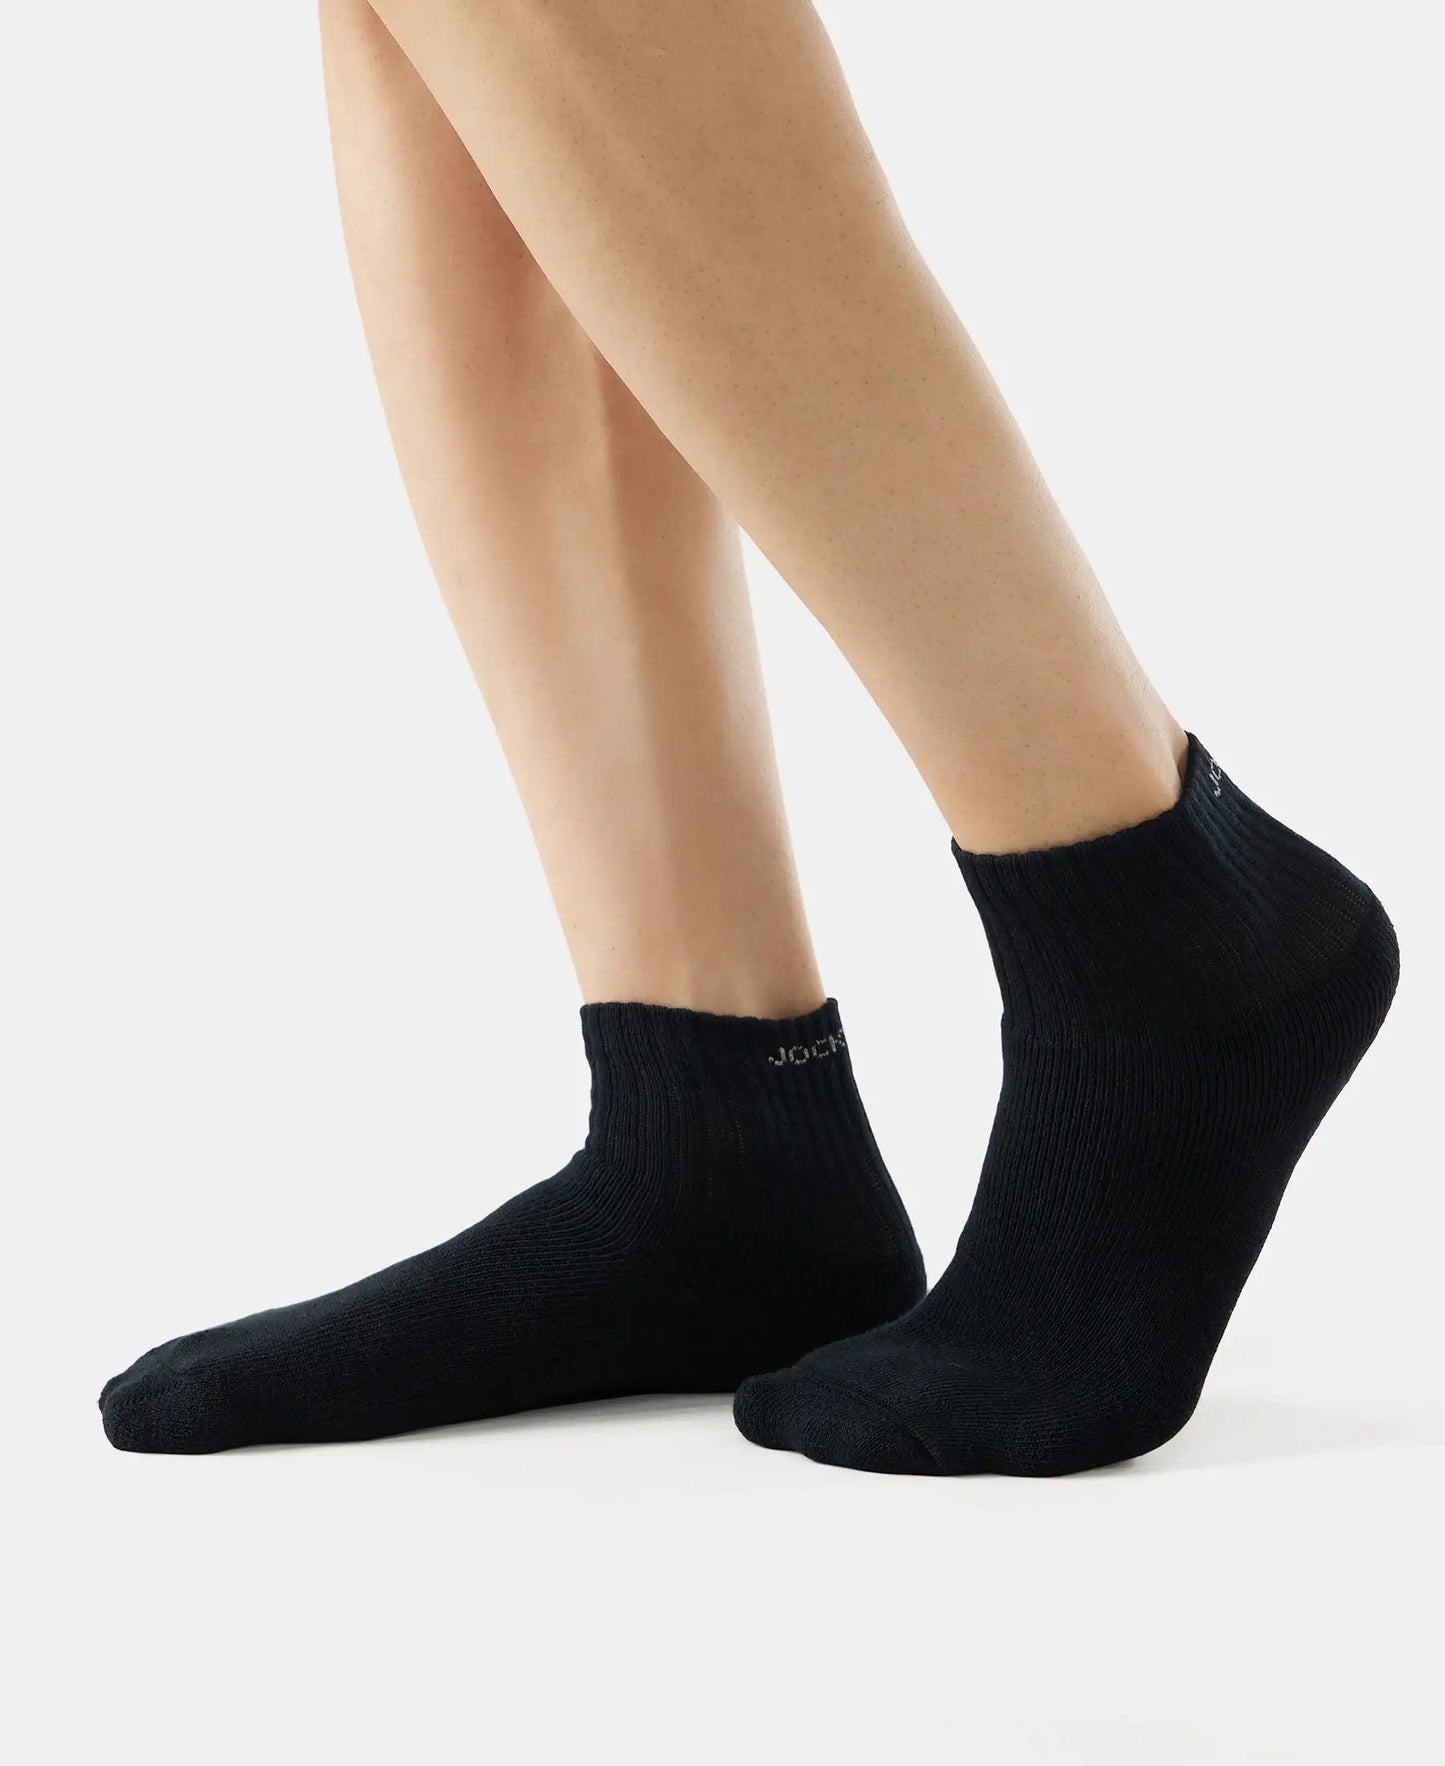 Compact Cotton Terry Ankle Length Socks With StayFresh Treatment - Black/Midgrey Melange/Charcoal Melange-7